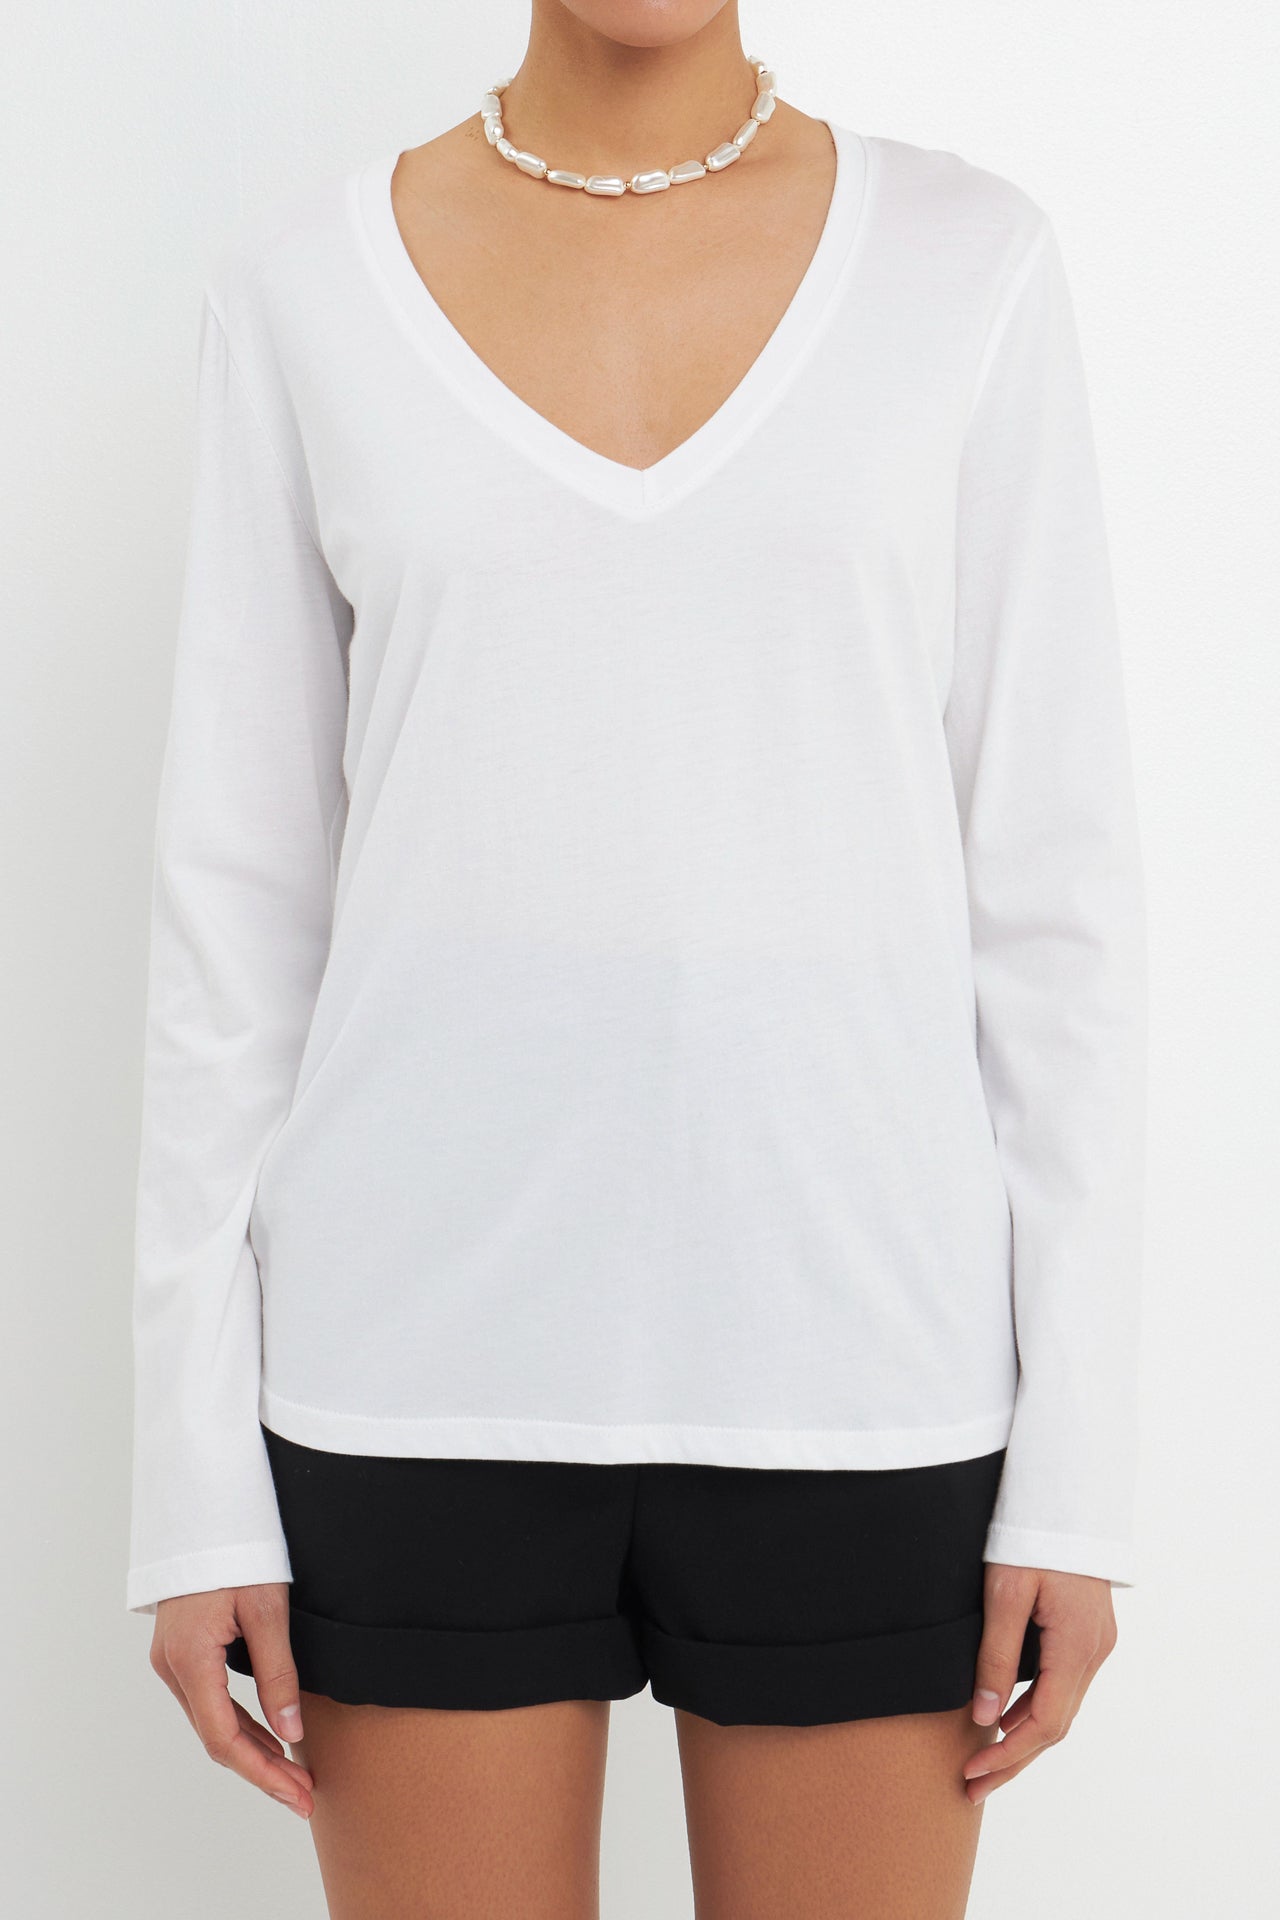 GREY LAB - Classic Long Sleeve V Neck Tee - T-SHIRTS available at Objectrare